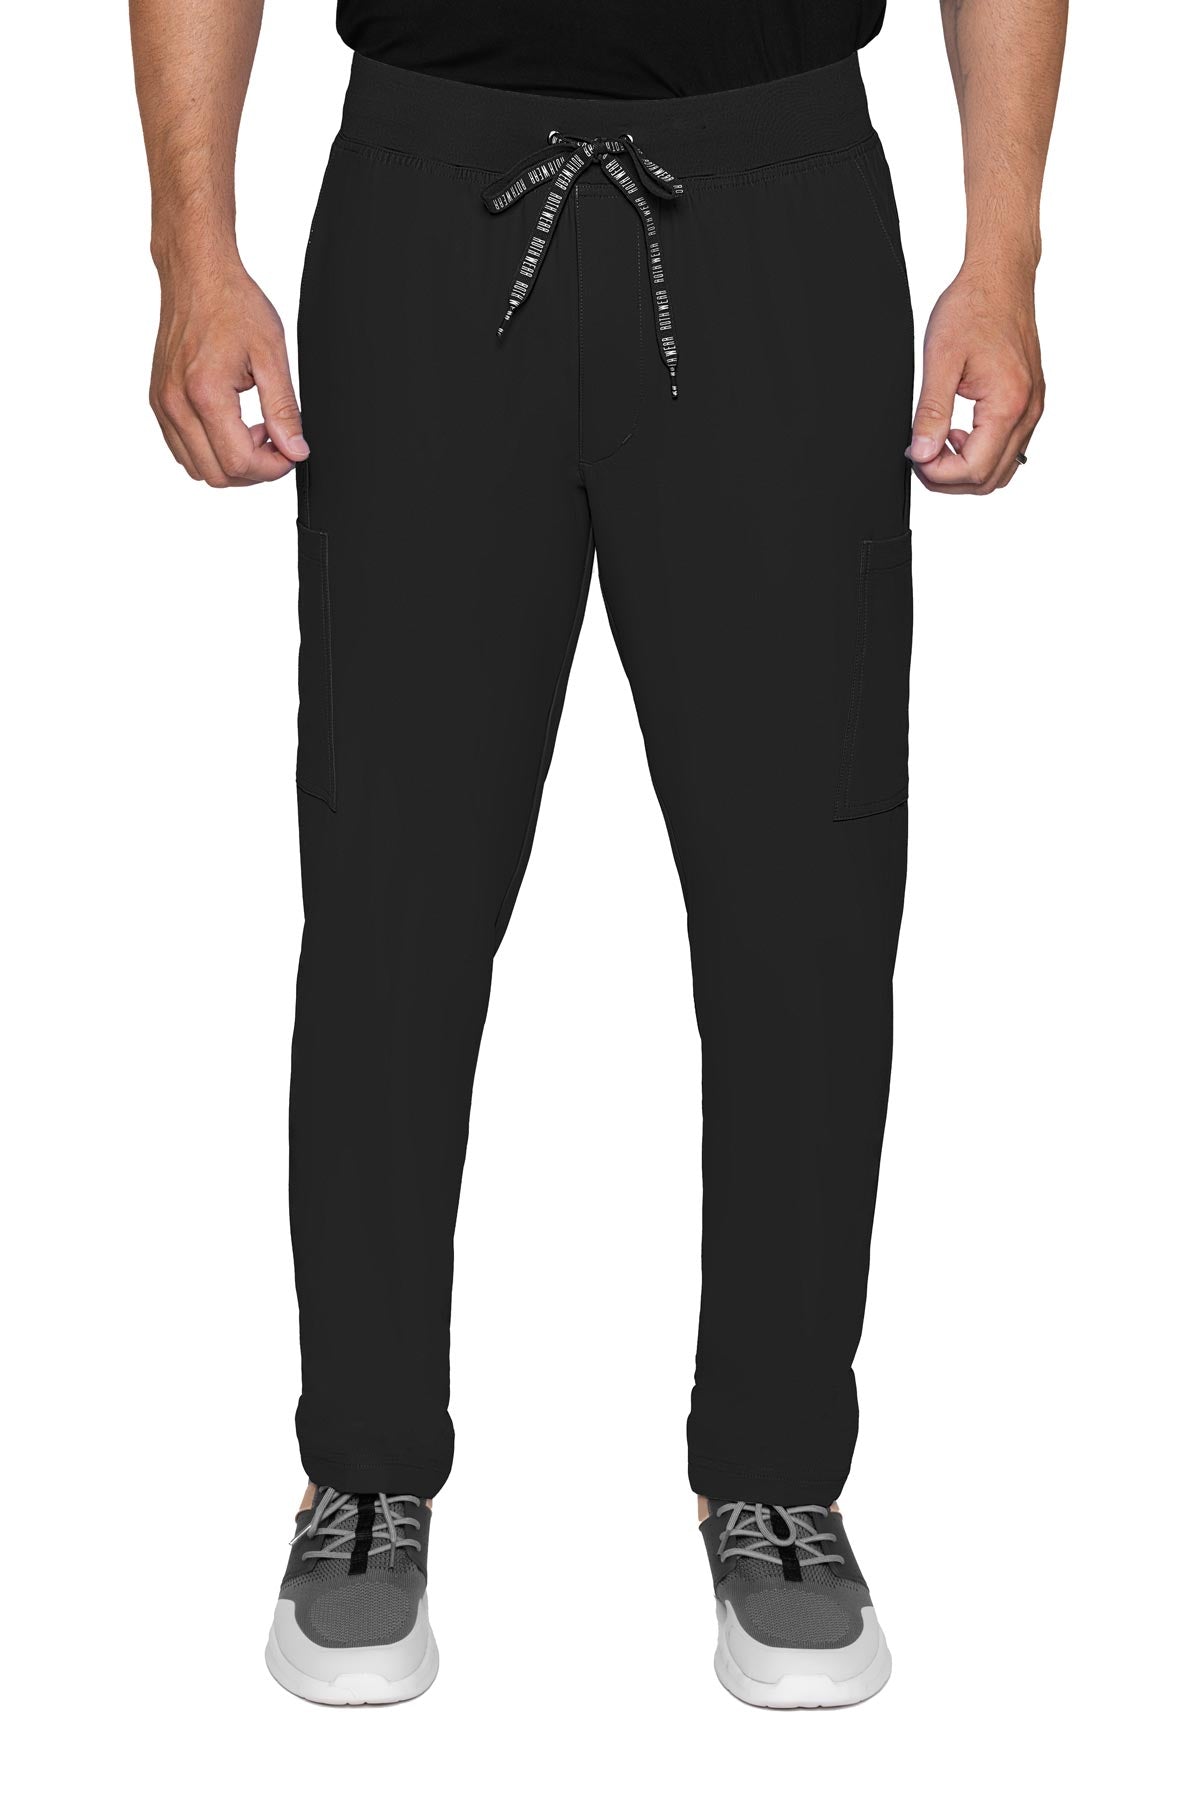 Med Couture Roth Wear Insight 2772 Men's Straight Leg Pant Black